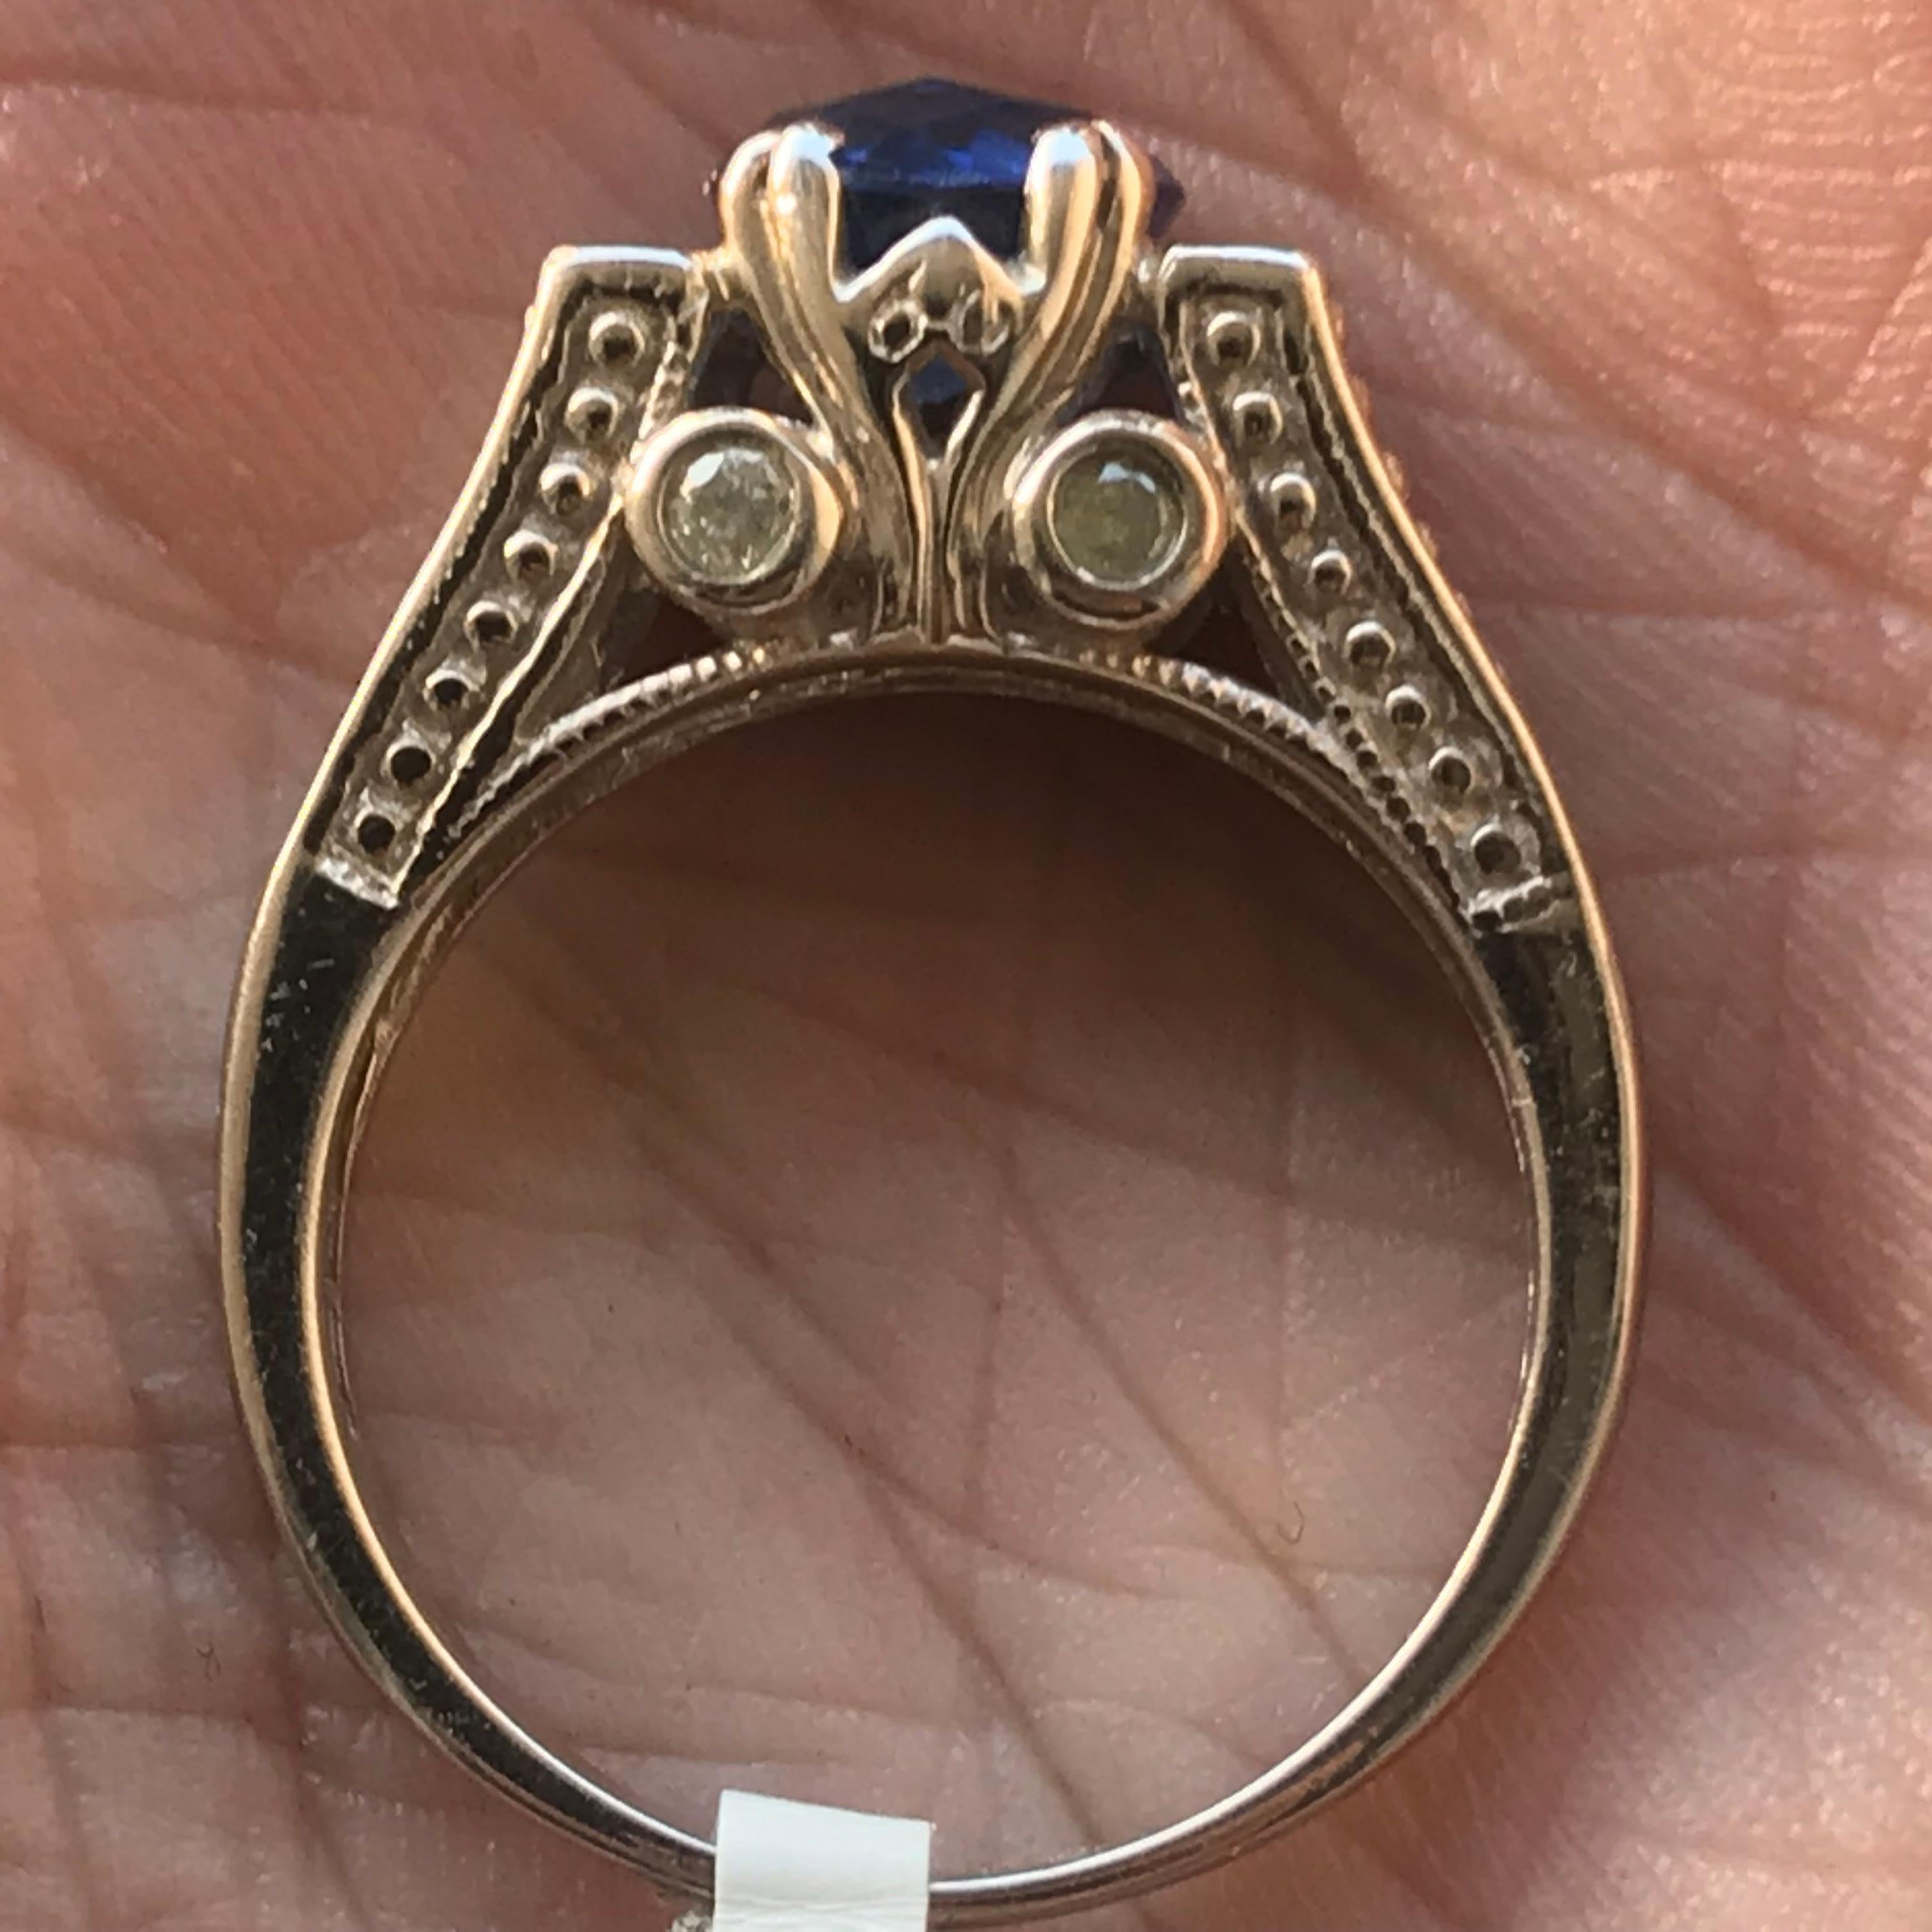 M4300-01

Can be sized to any finger size, this ring is currently in stock but if sold the ring will be made to order and take approximately 1-3 weeks from customers final design approval. If you need a sooner date let us know and we will see if we